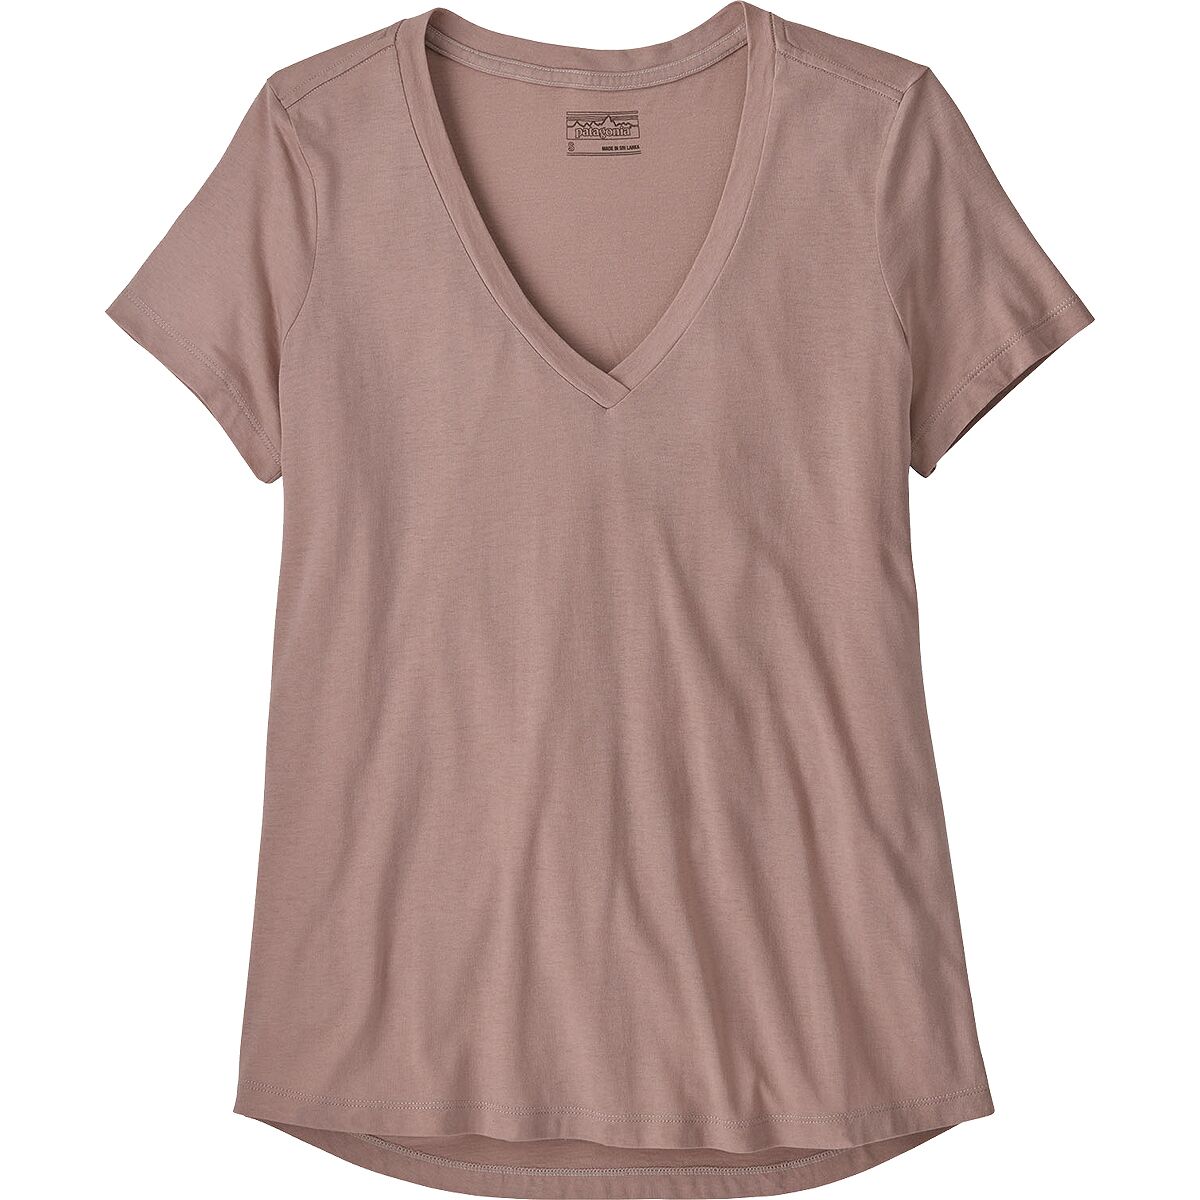 Patagonia Side Current Short-Sleeve T-Shirt - Women's